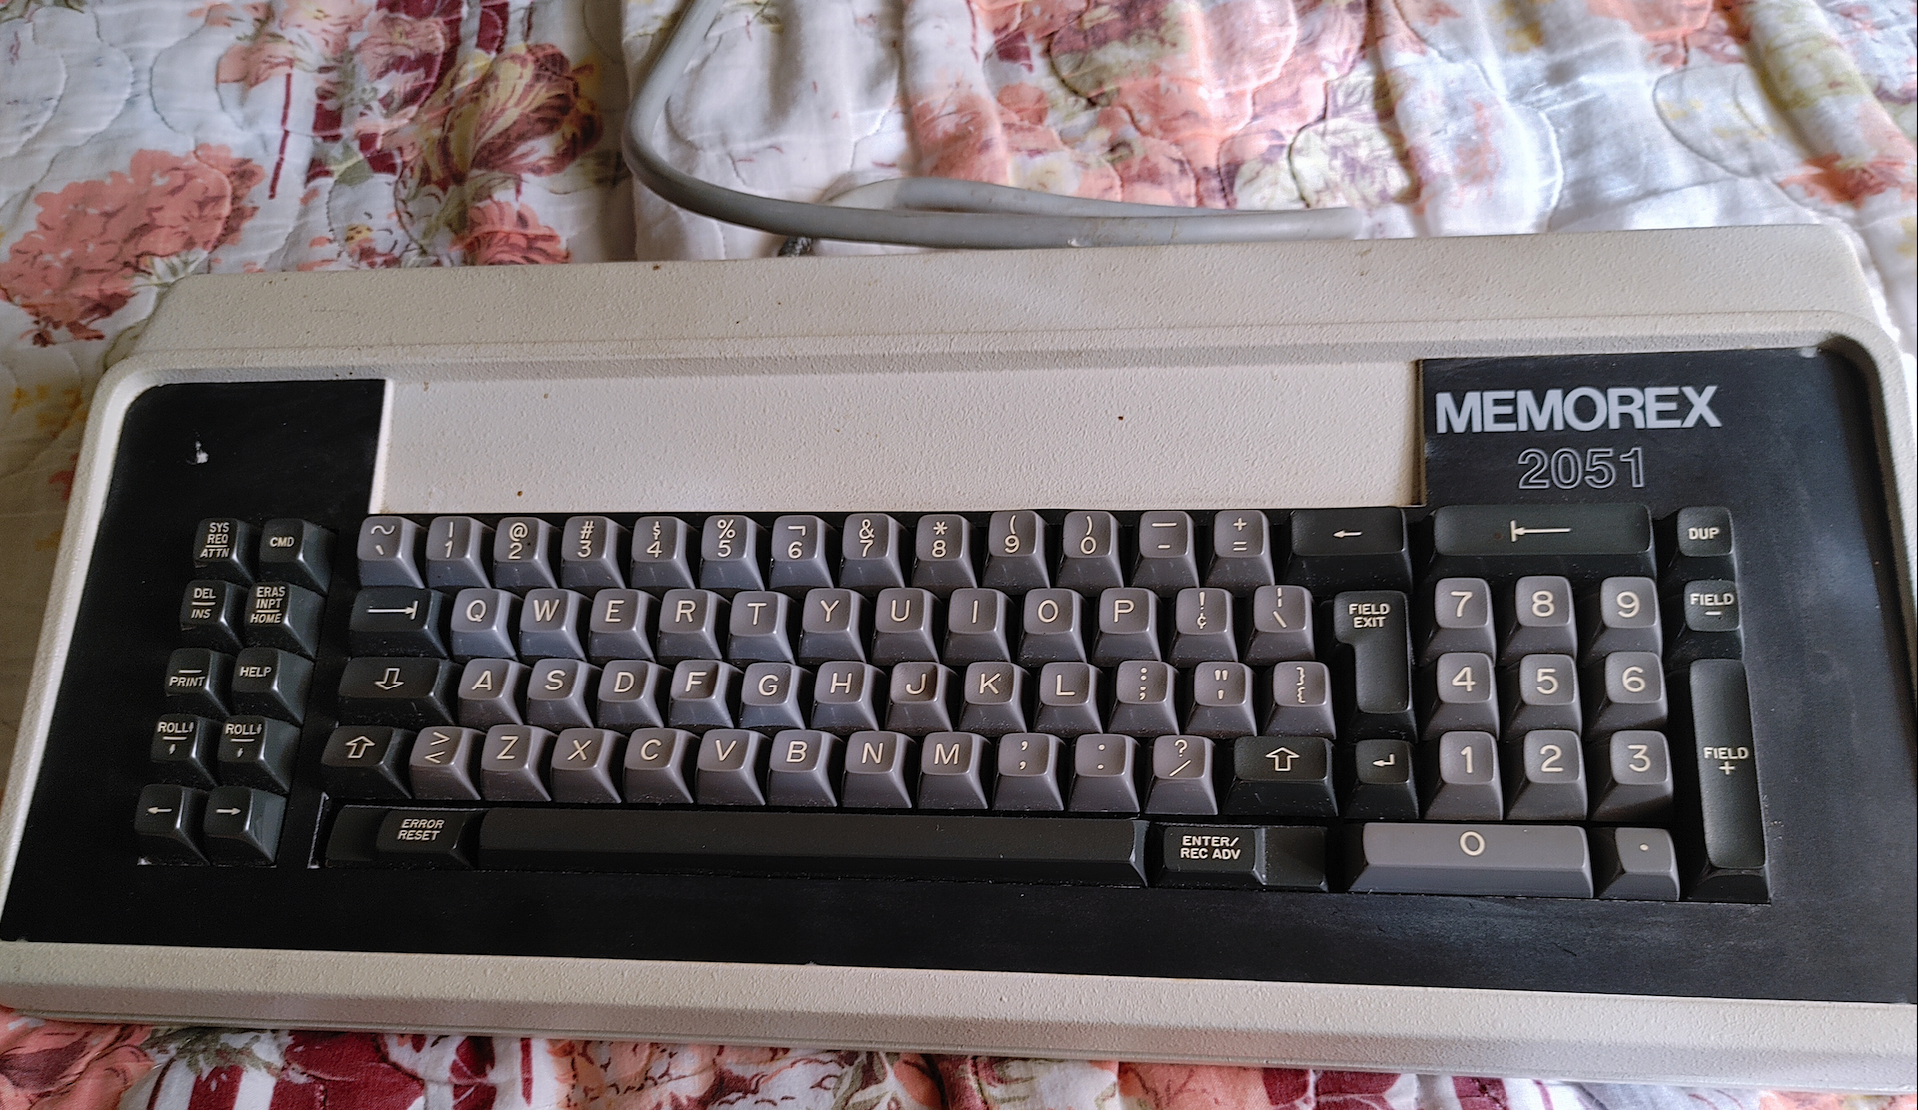 The Memorex 2051 Terminal Keyboard in a high resolution, for once, outside the advertisement.